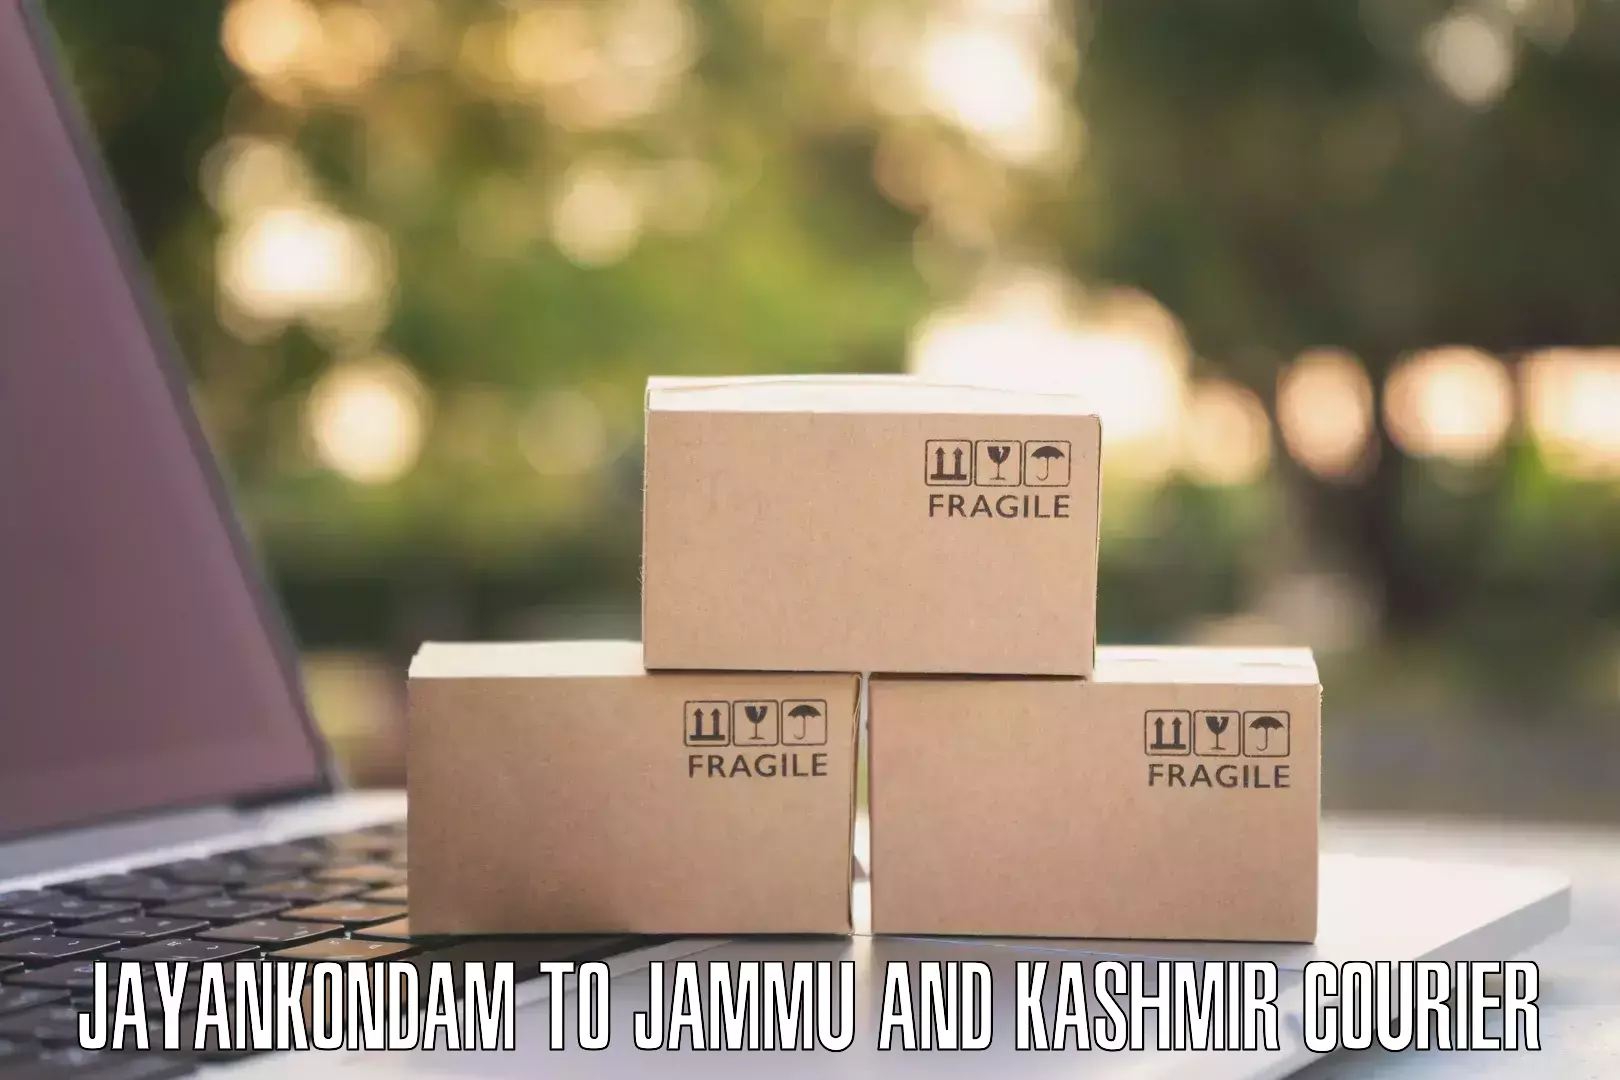 Same-day delivery solutions Jayankondam to Bhaderwah